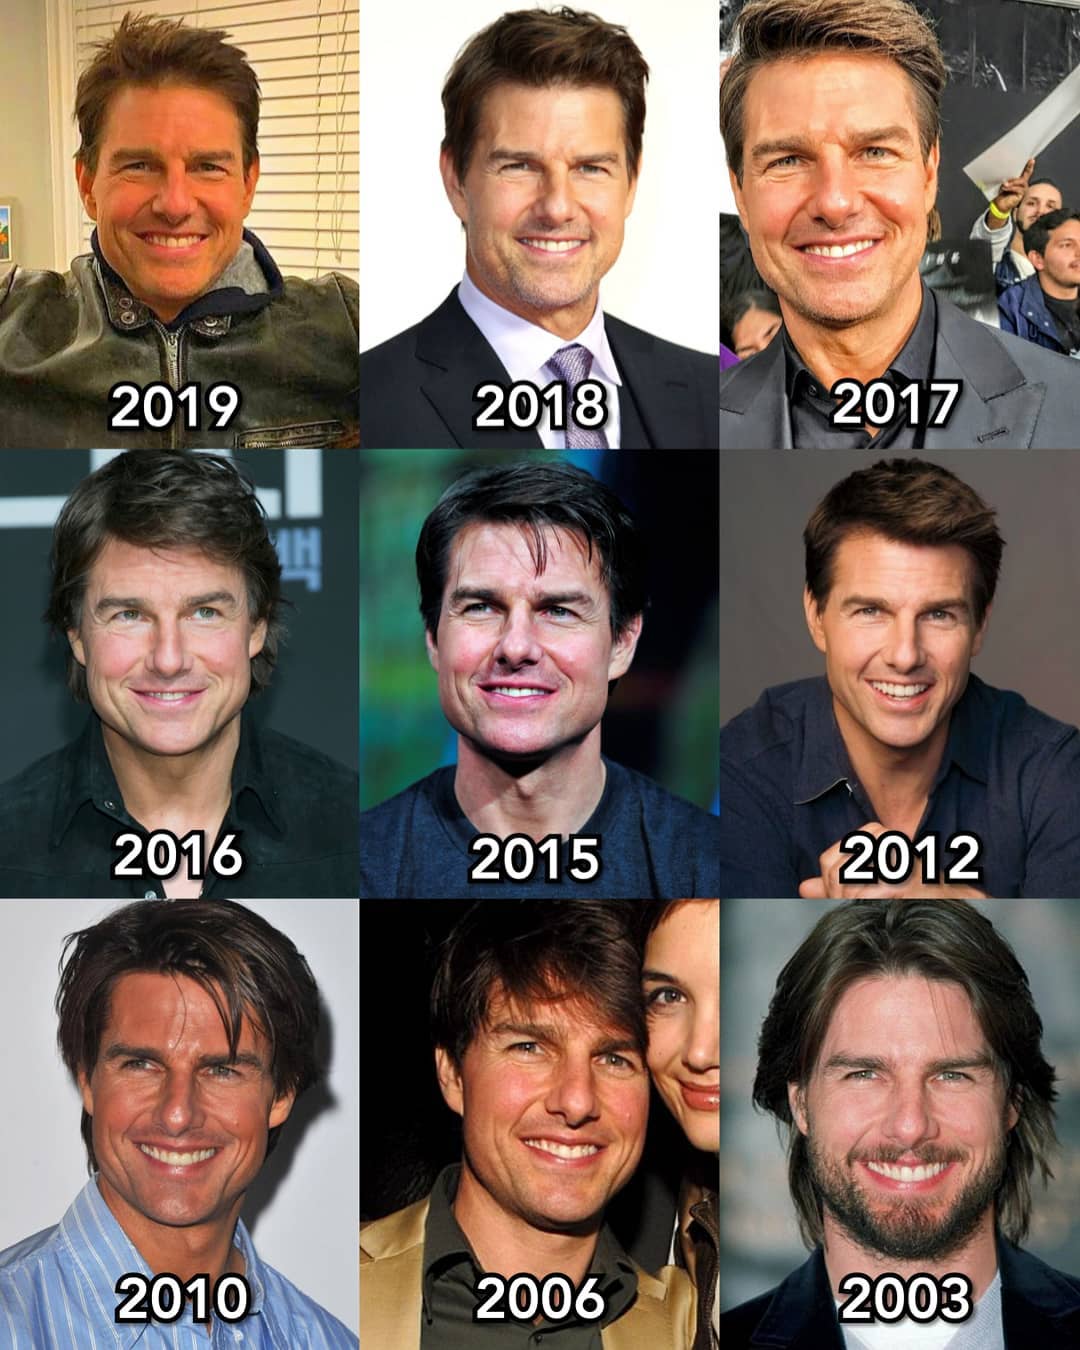 Tom Cruise Haircut From 2003 To 2019